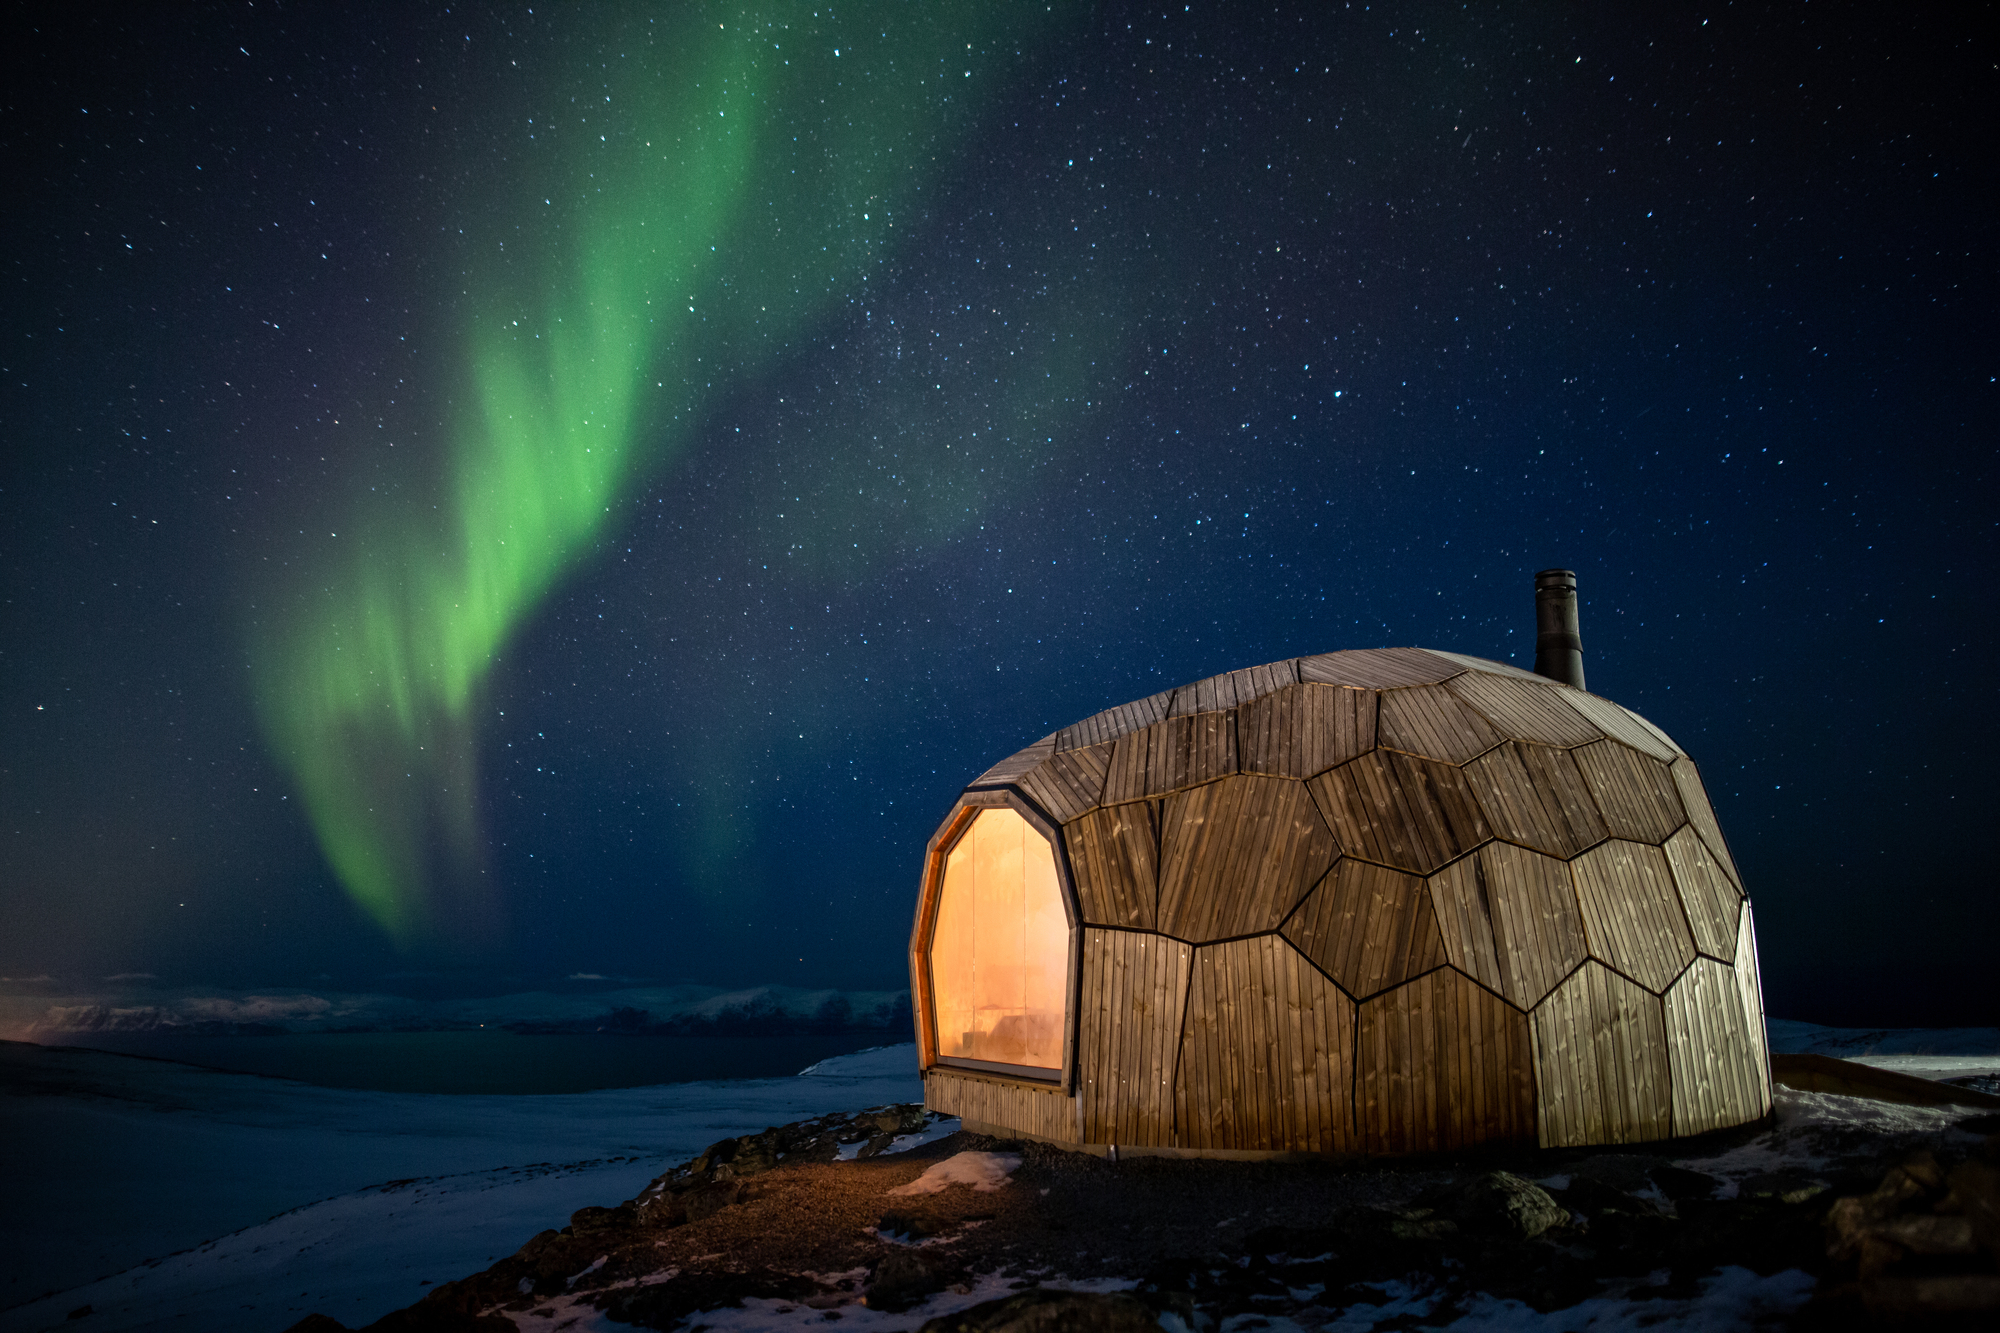 The aurora borealis illuminates the surrounding snow in the nighttime sky above a lit up Hammerfest Cabin nestled in Hammerfest, Norway and features Kebony Modified Wood Character Cladding